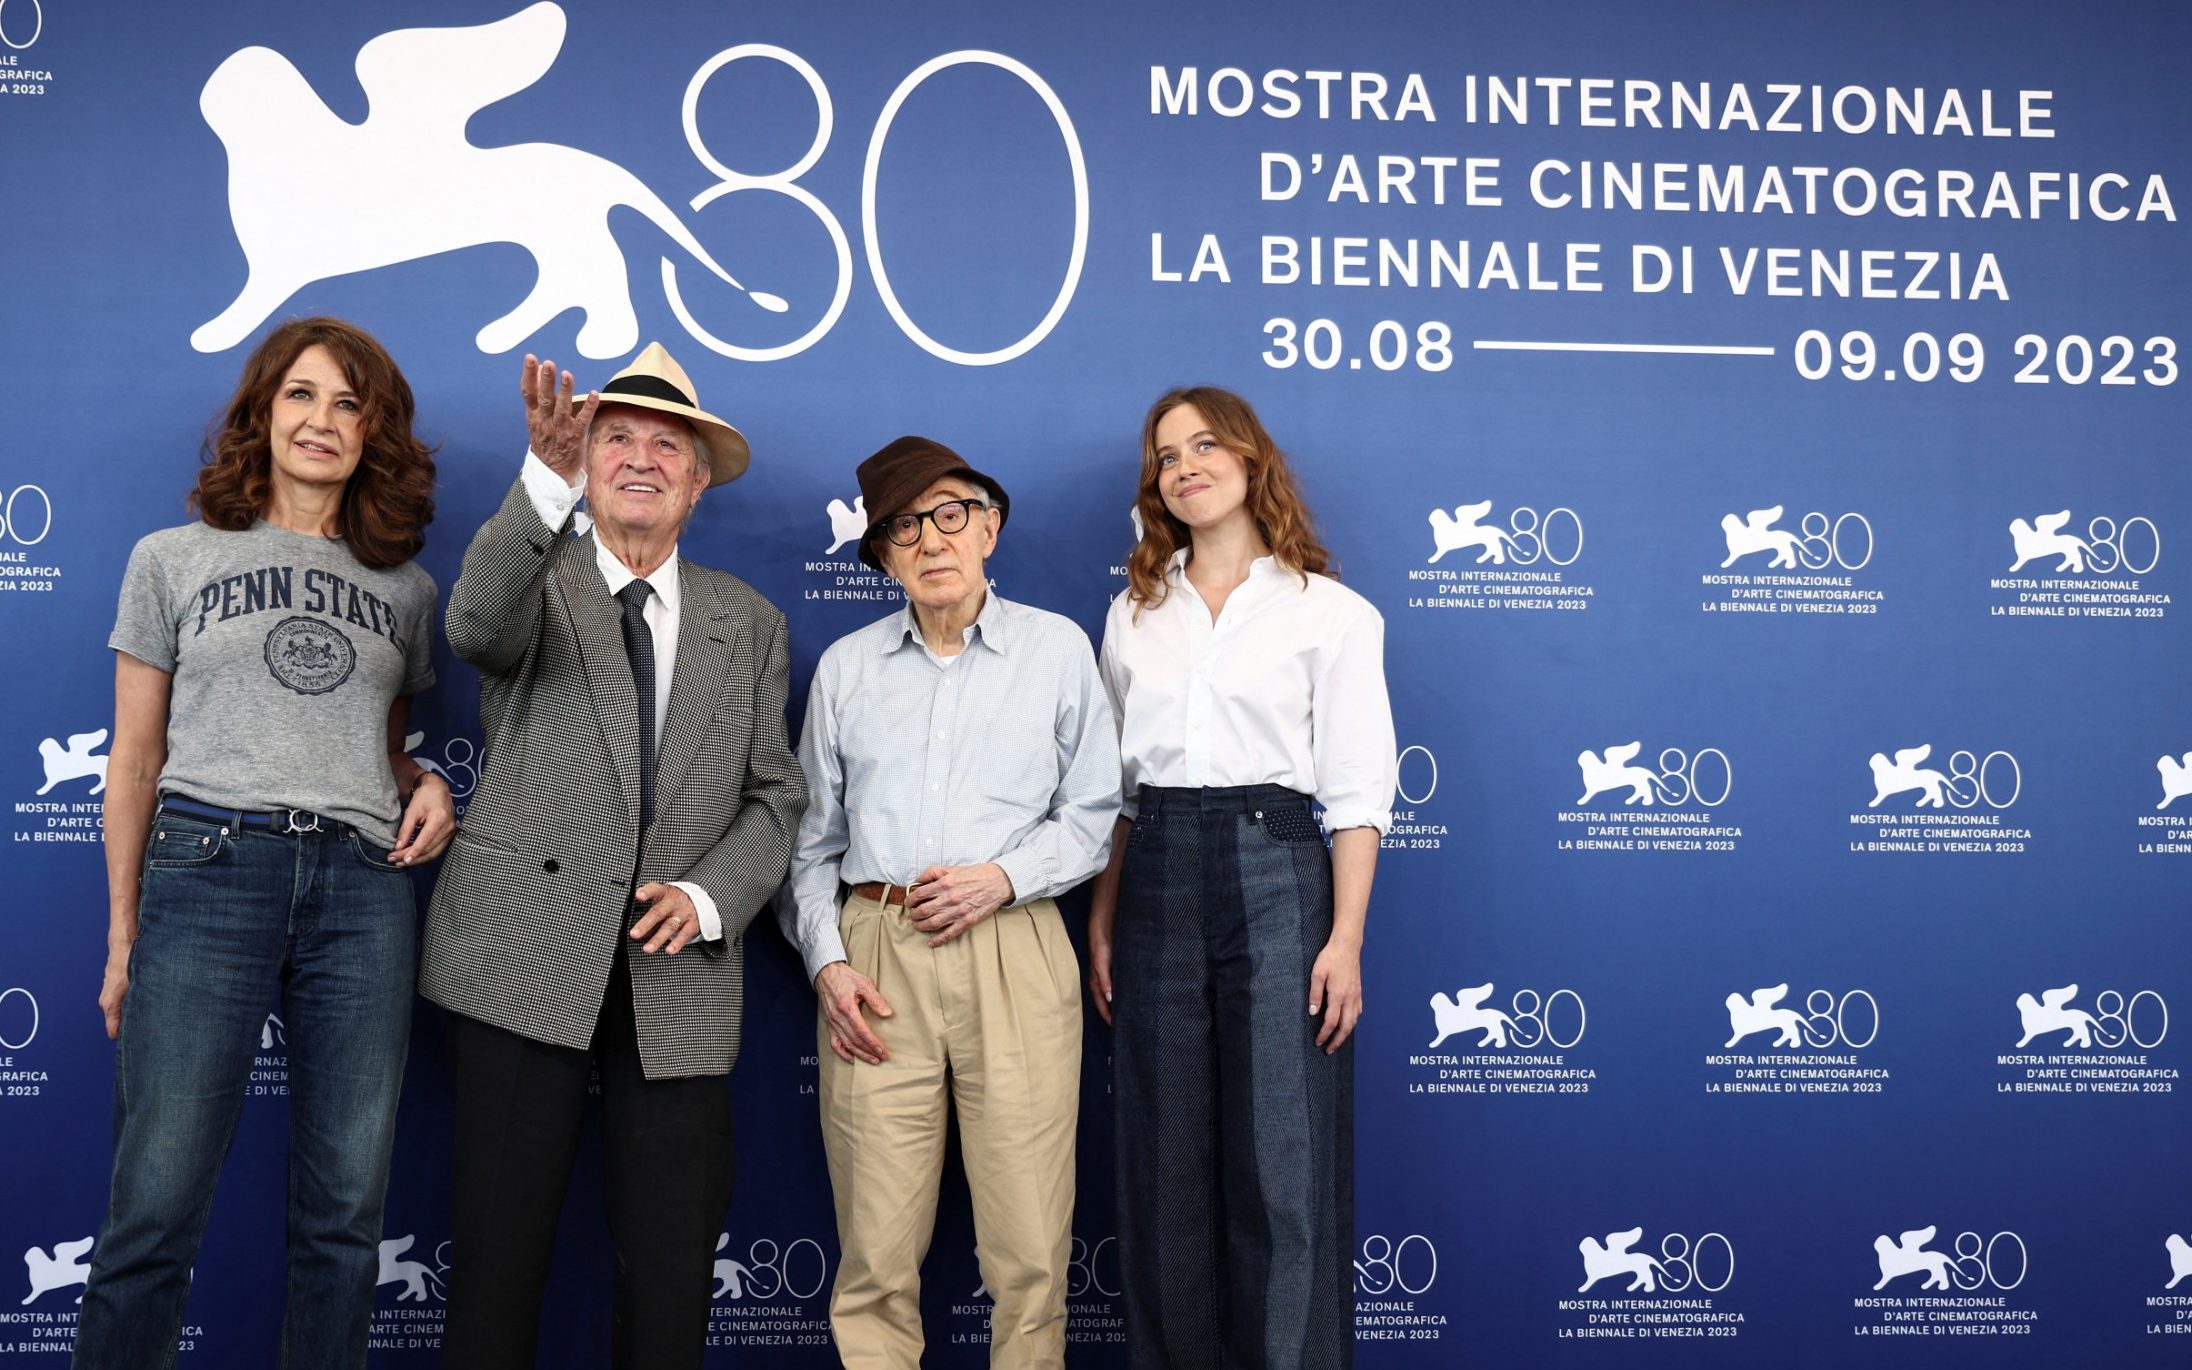 Woody Allen's COUP DE CHANCE – Venice Film Festival press conference –  videos and quotes – The Woody Allen Pages